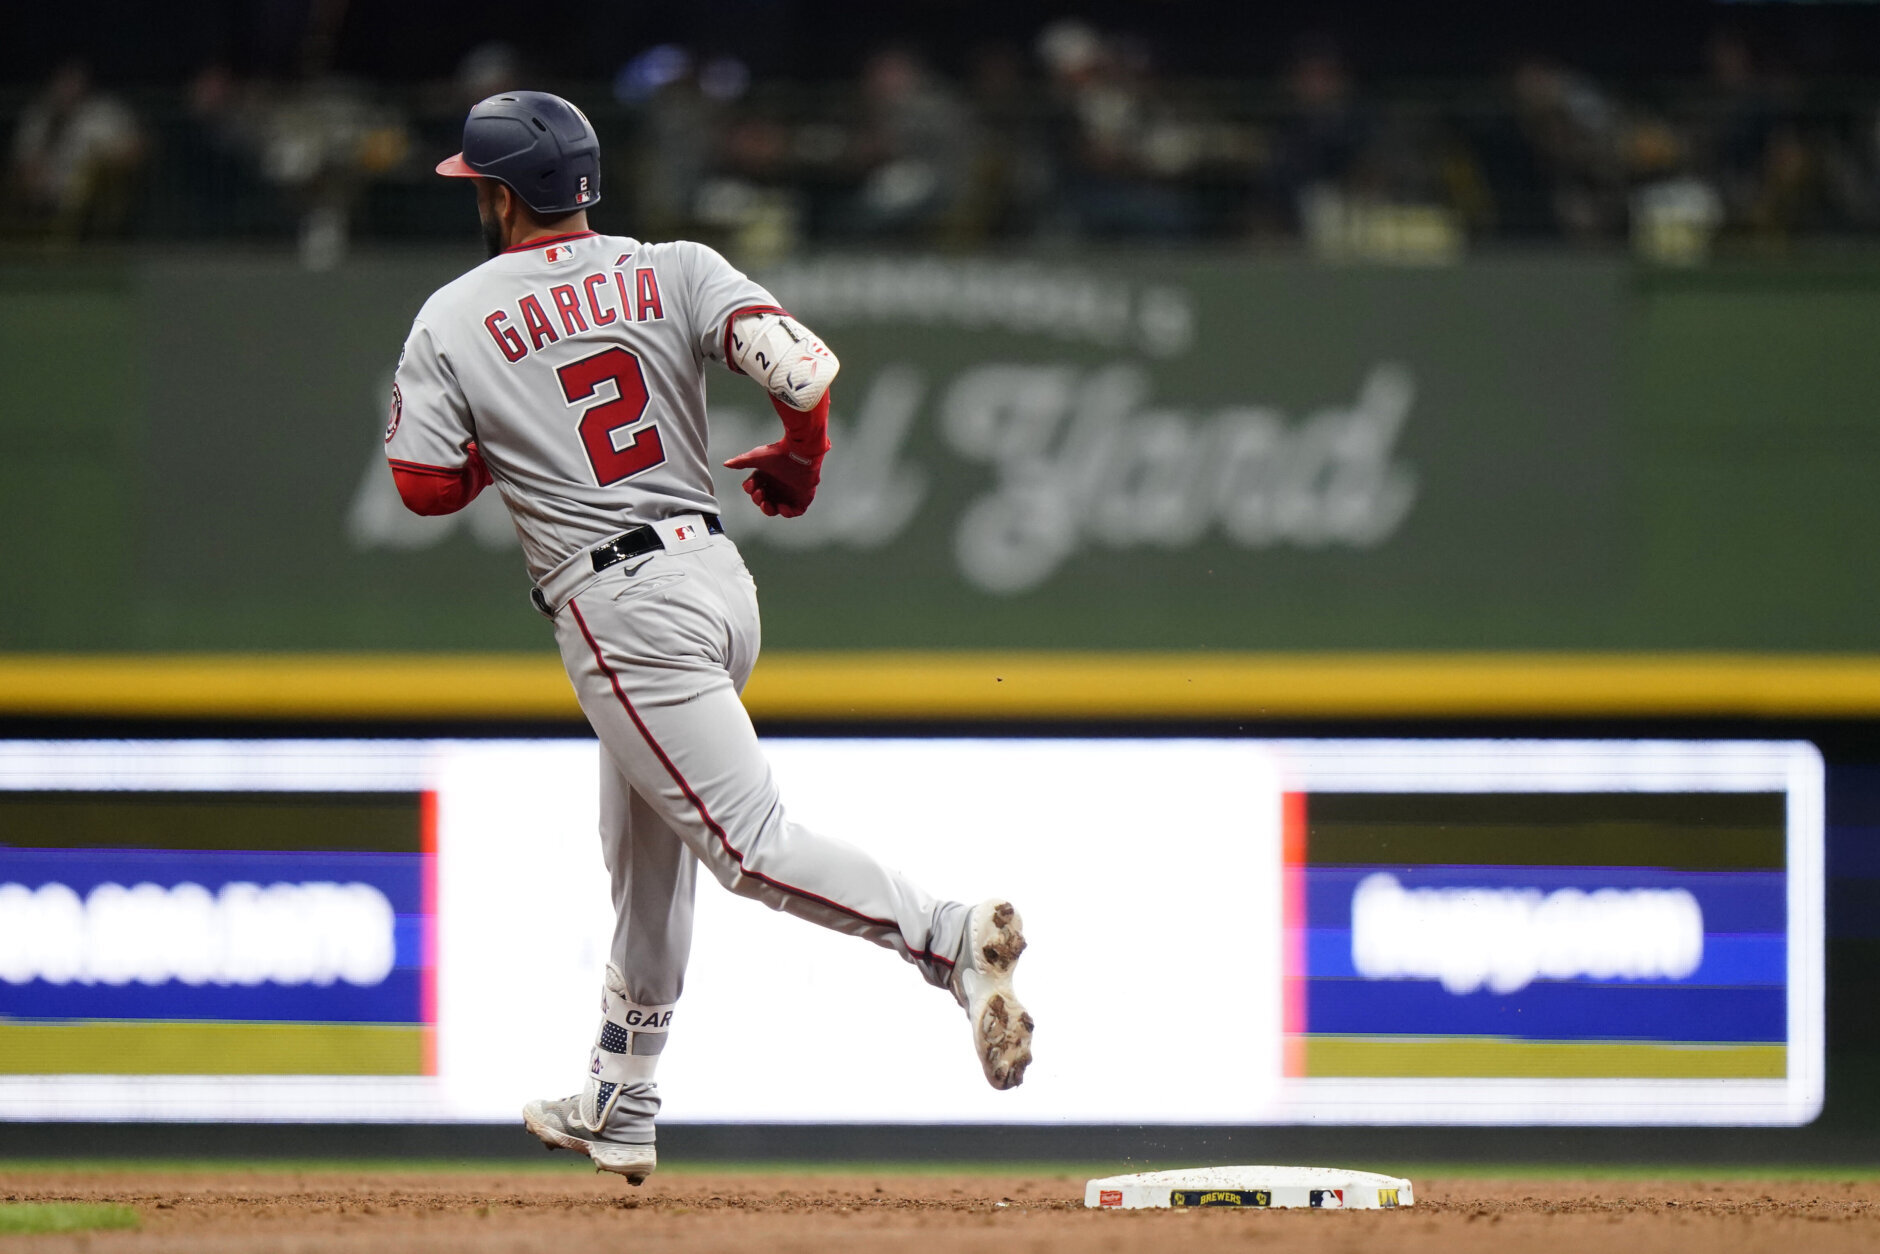 RED SOX NOTEBOOK: Chavis leads things off